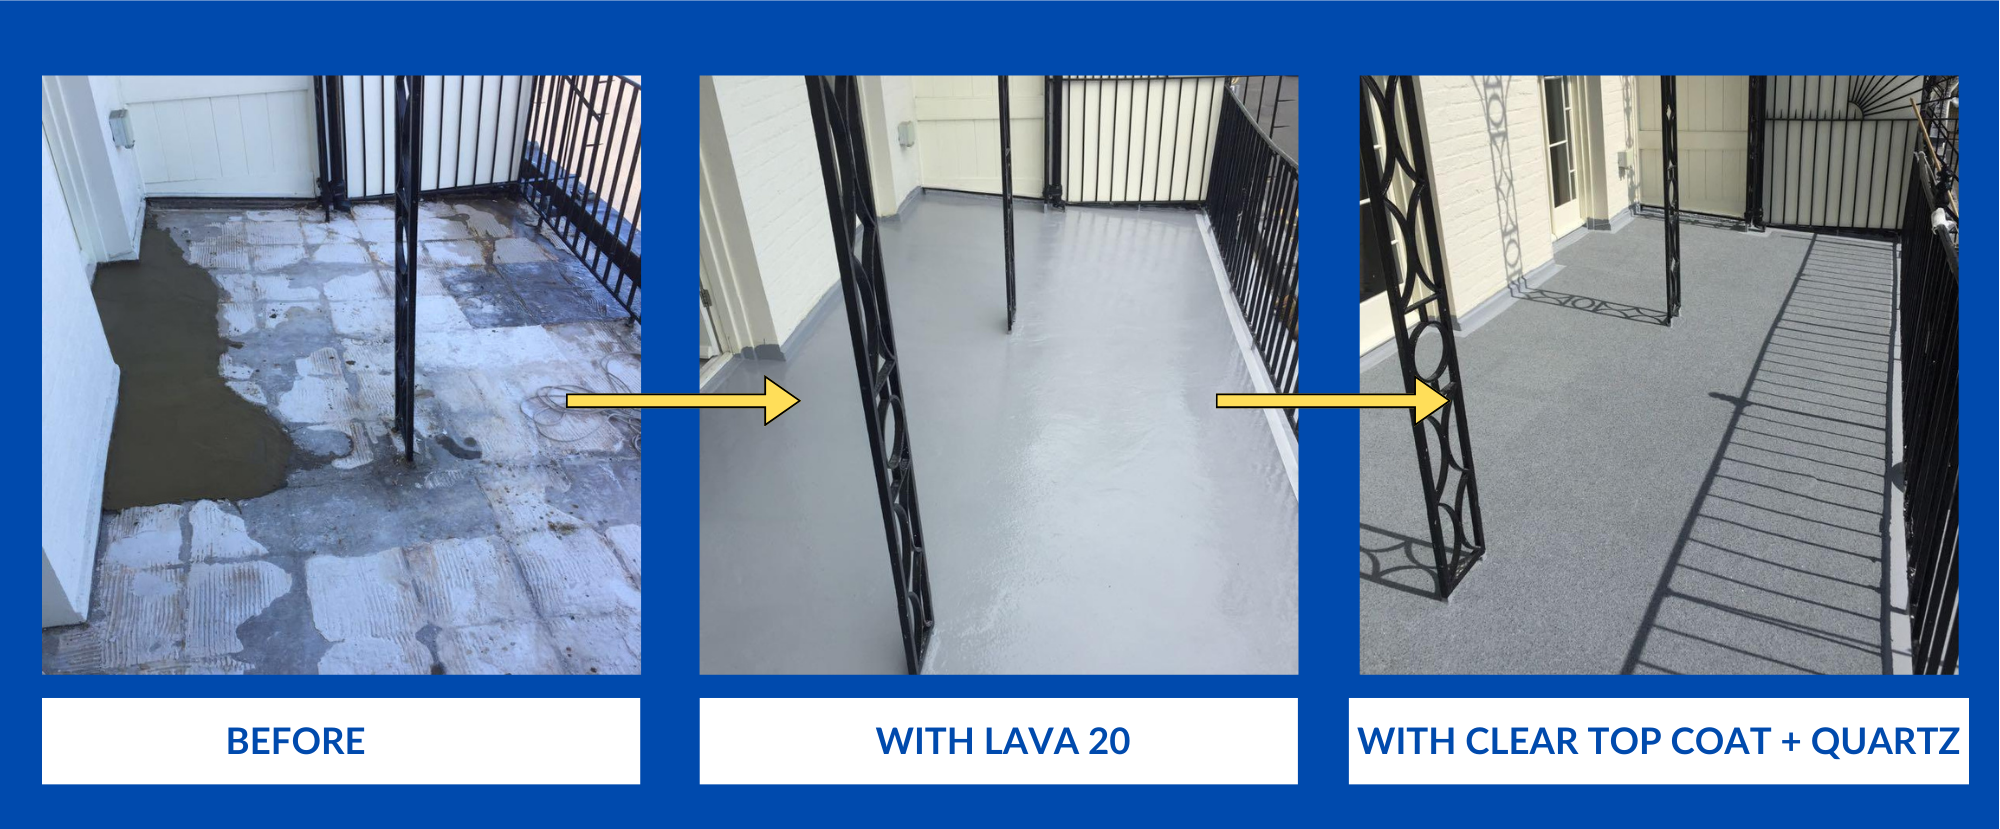 Balcony restored with Anti Slip System before and after